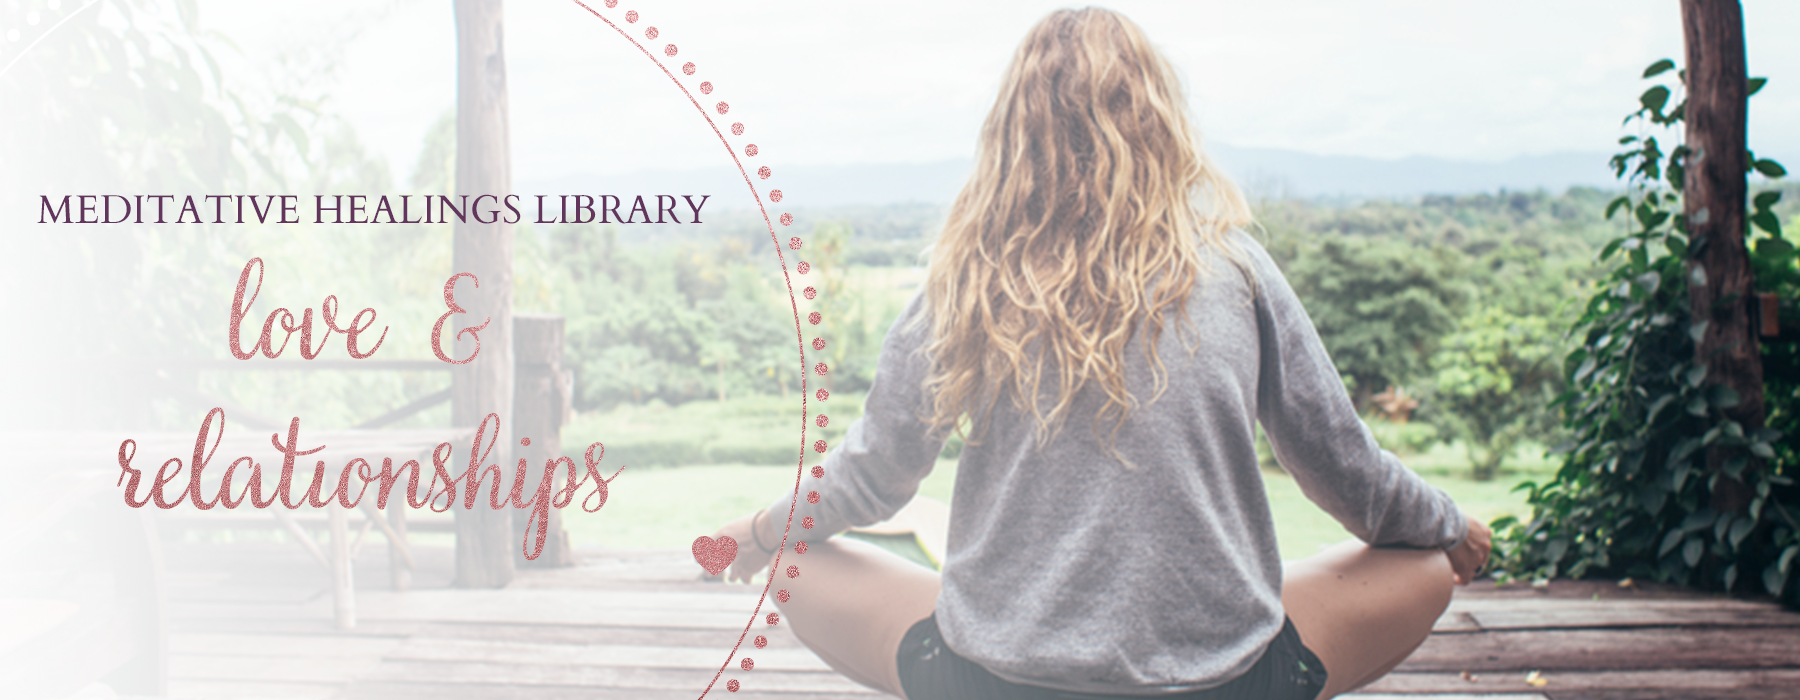 Angela Strank - Welcome to the Meditative Healings Library - Love & Relationships